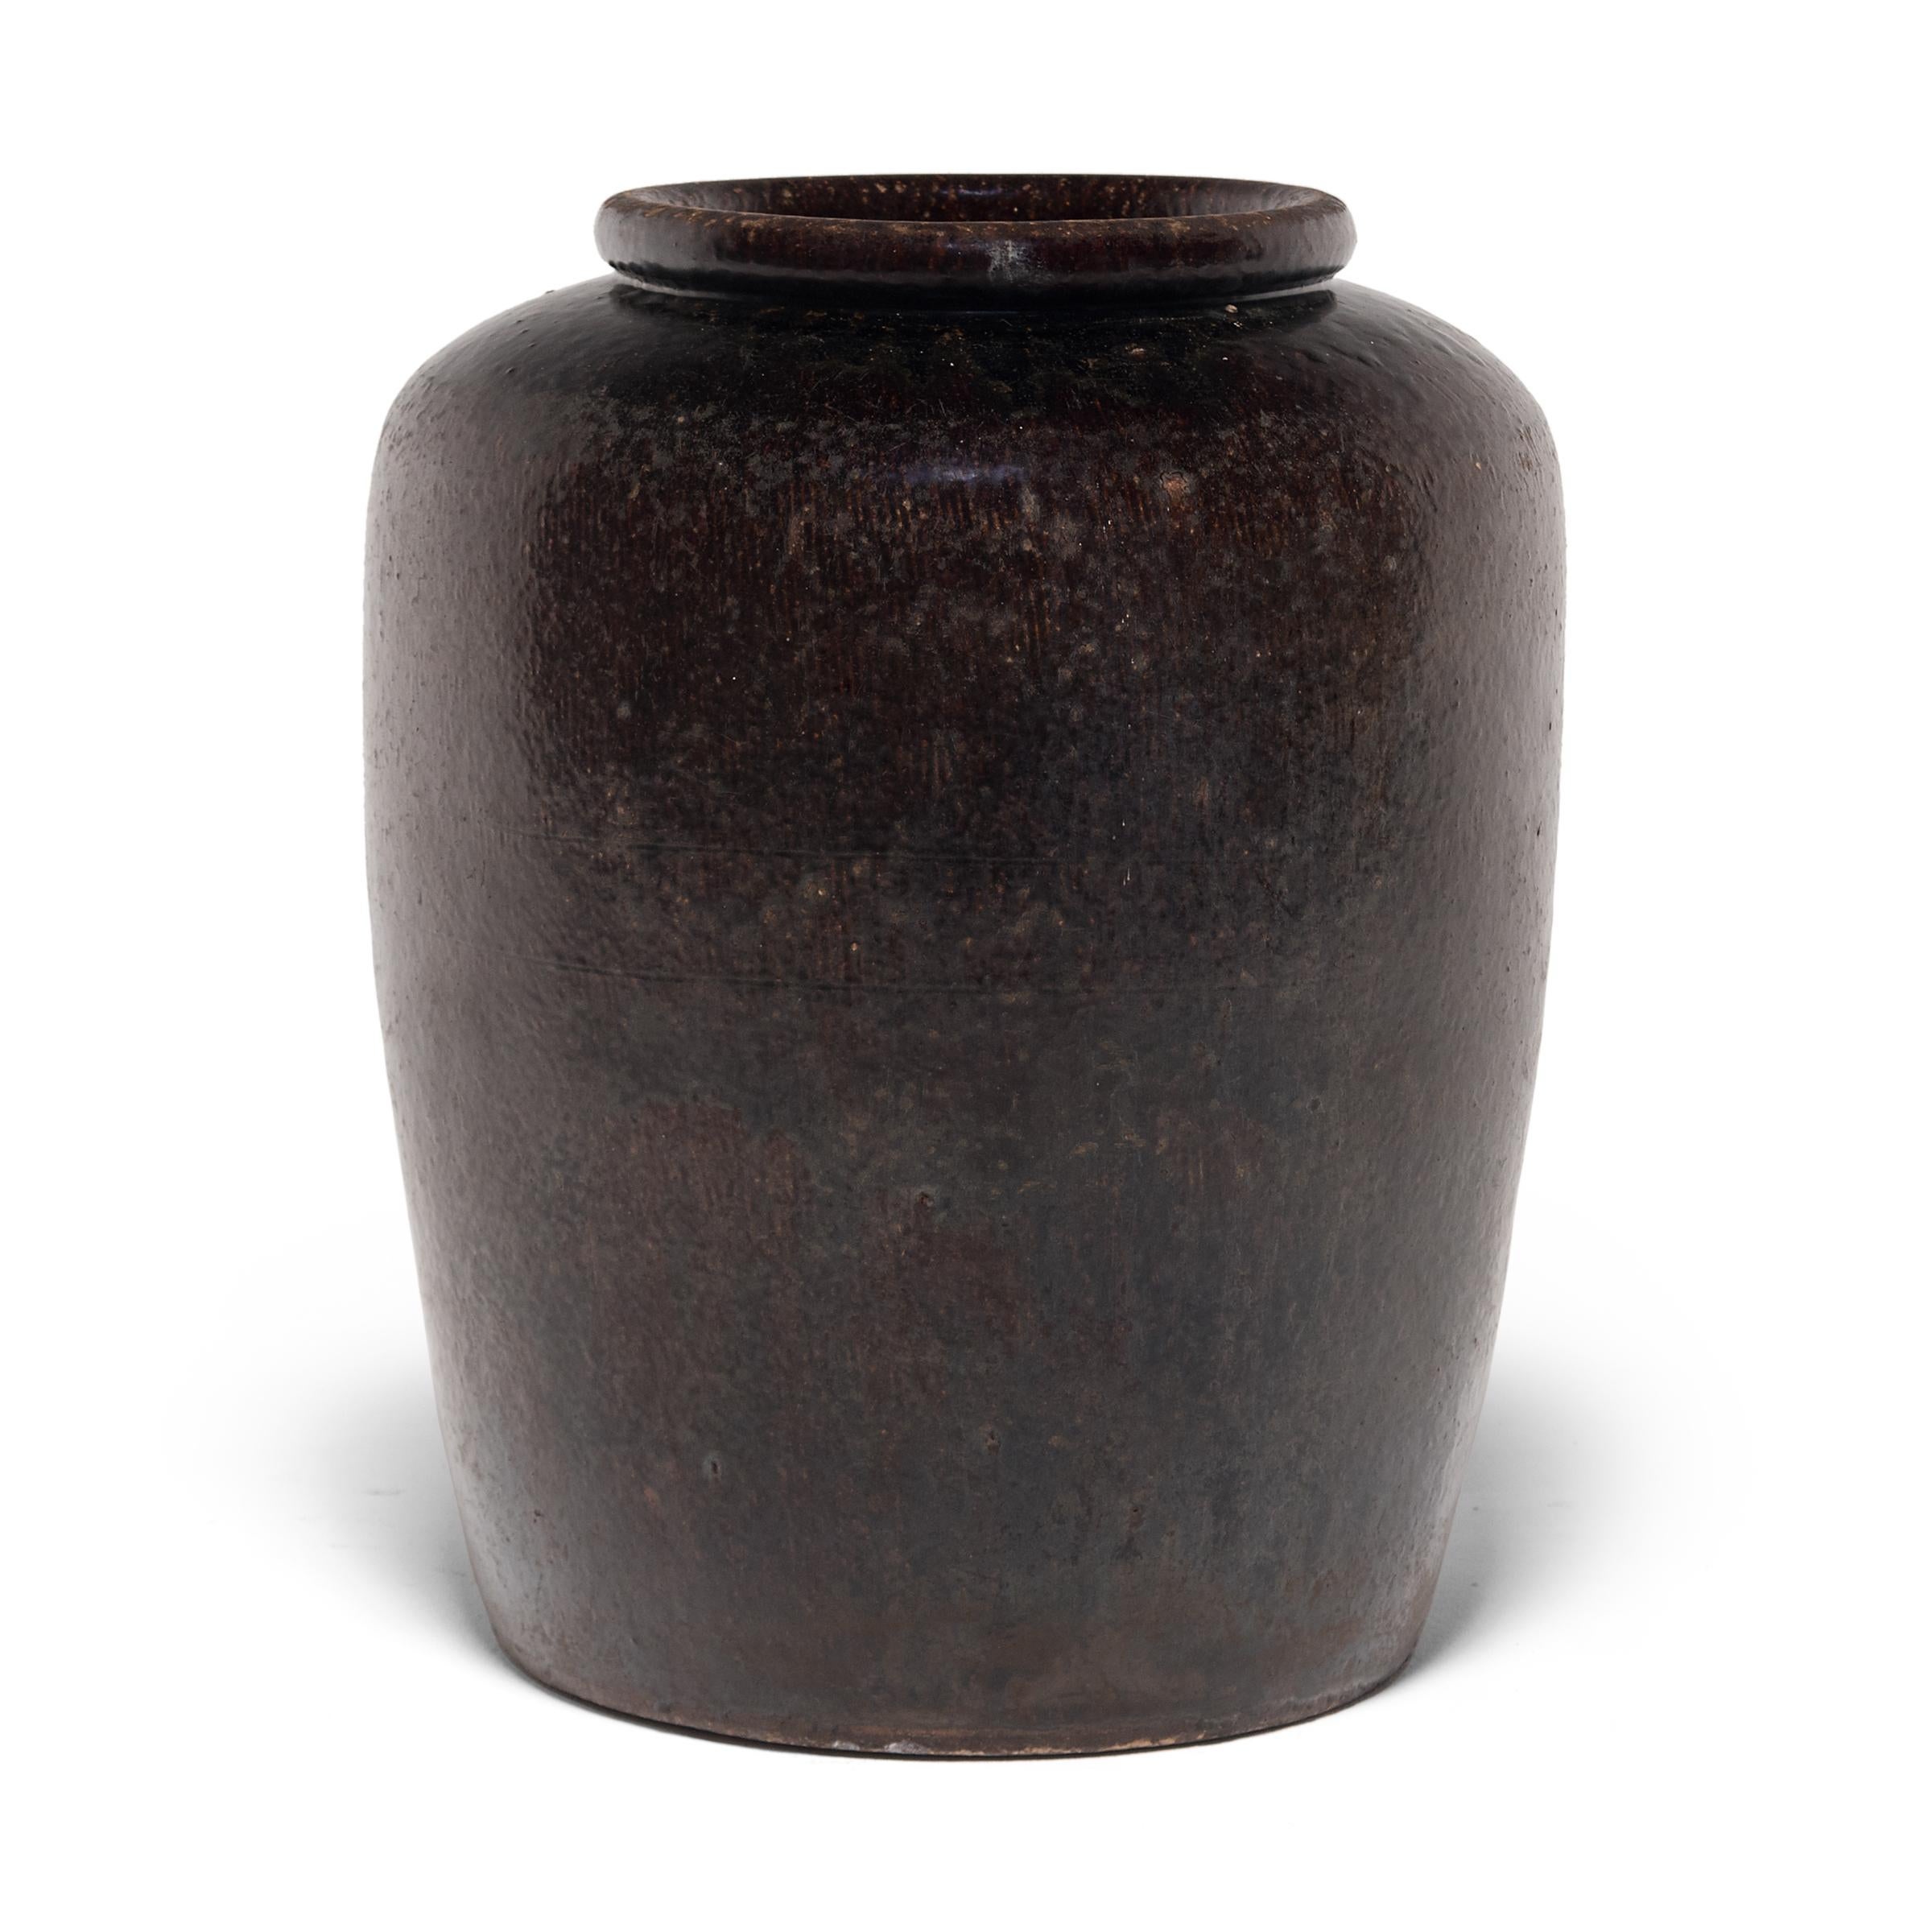 Originally used for pickling foods, this early 20th century ceramic jar is coated inside and out with a rich dark brown glaze. A subtle ridged texture patterning the jar's high shoulders manipulate the glaze to pool irregularly across the surface.